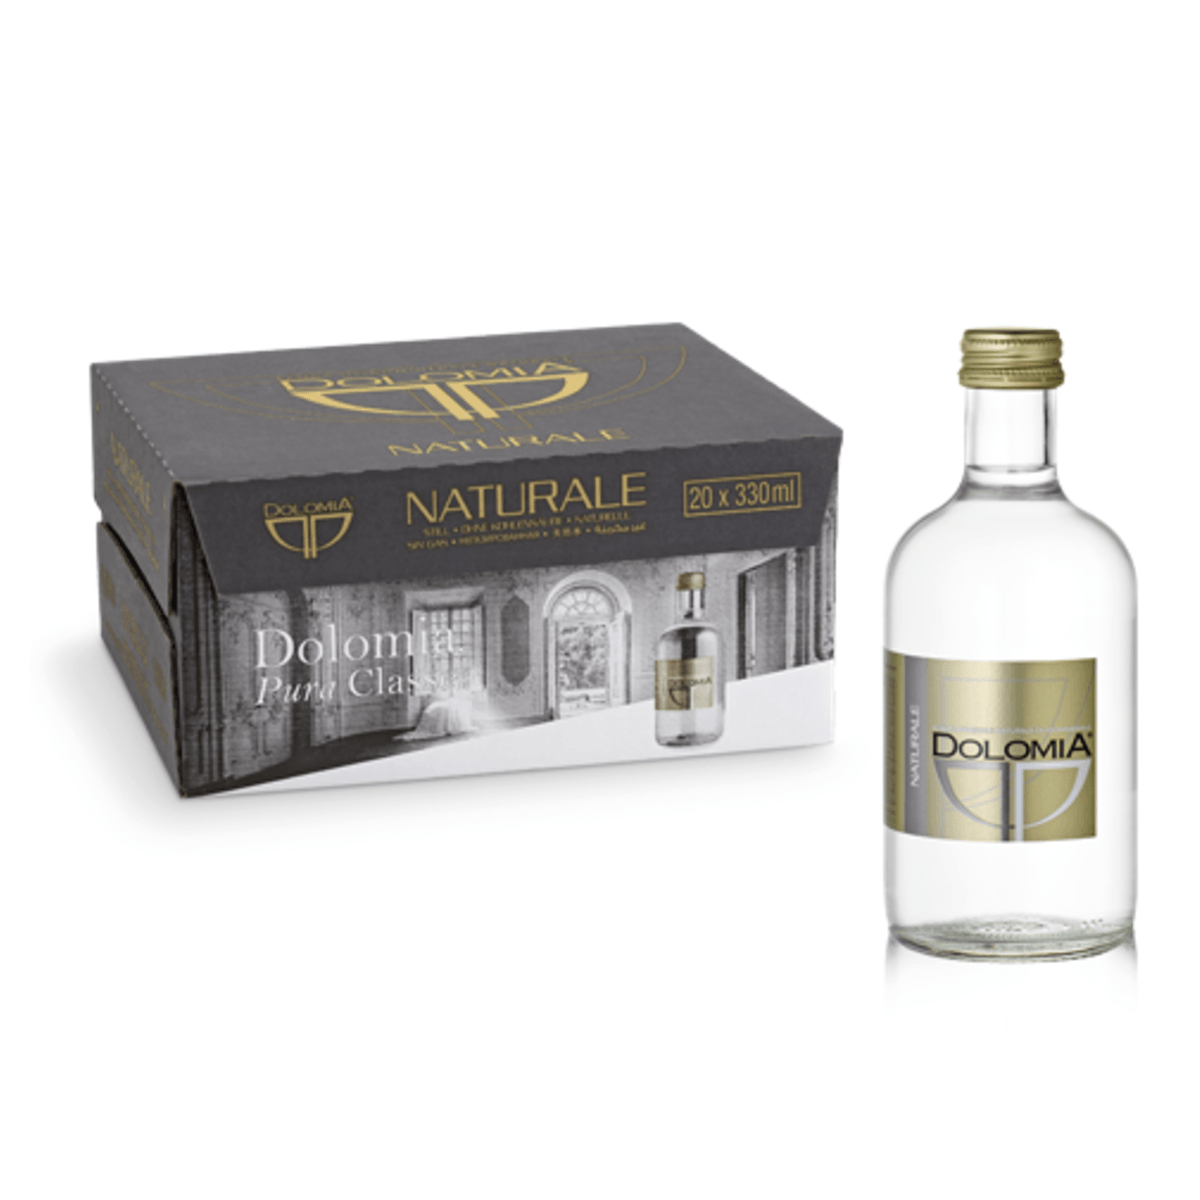 Dolomia Water Exclusive Glass Still 330ml x 20 pieces - THINK GOURMET